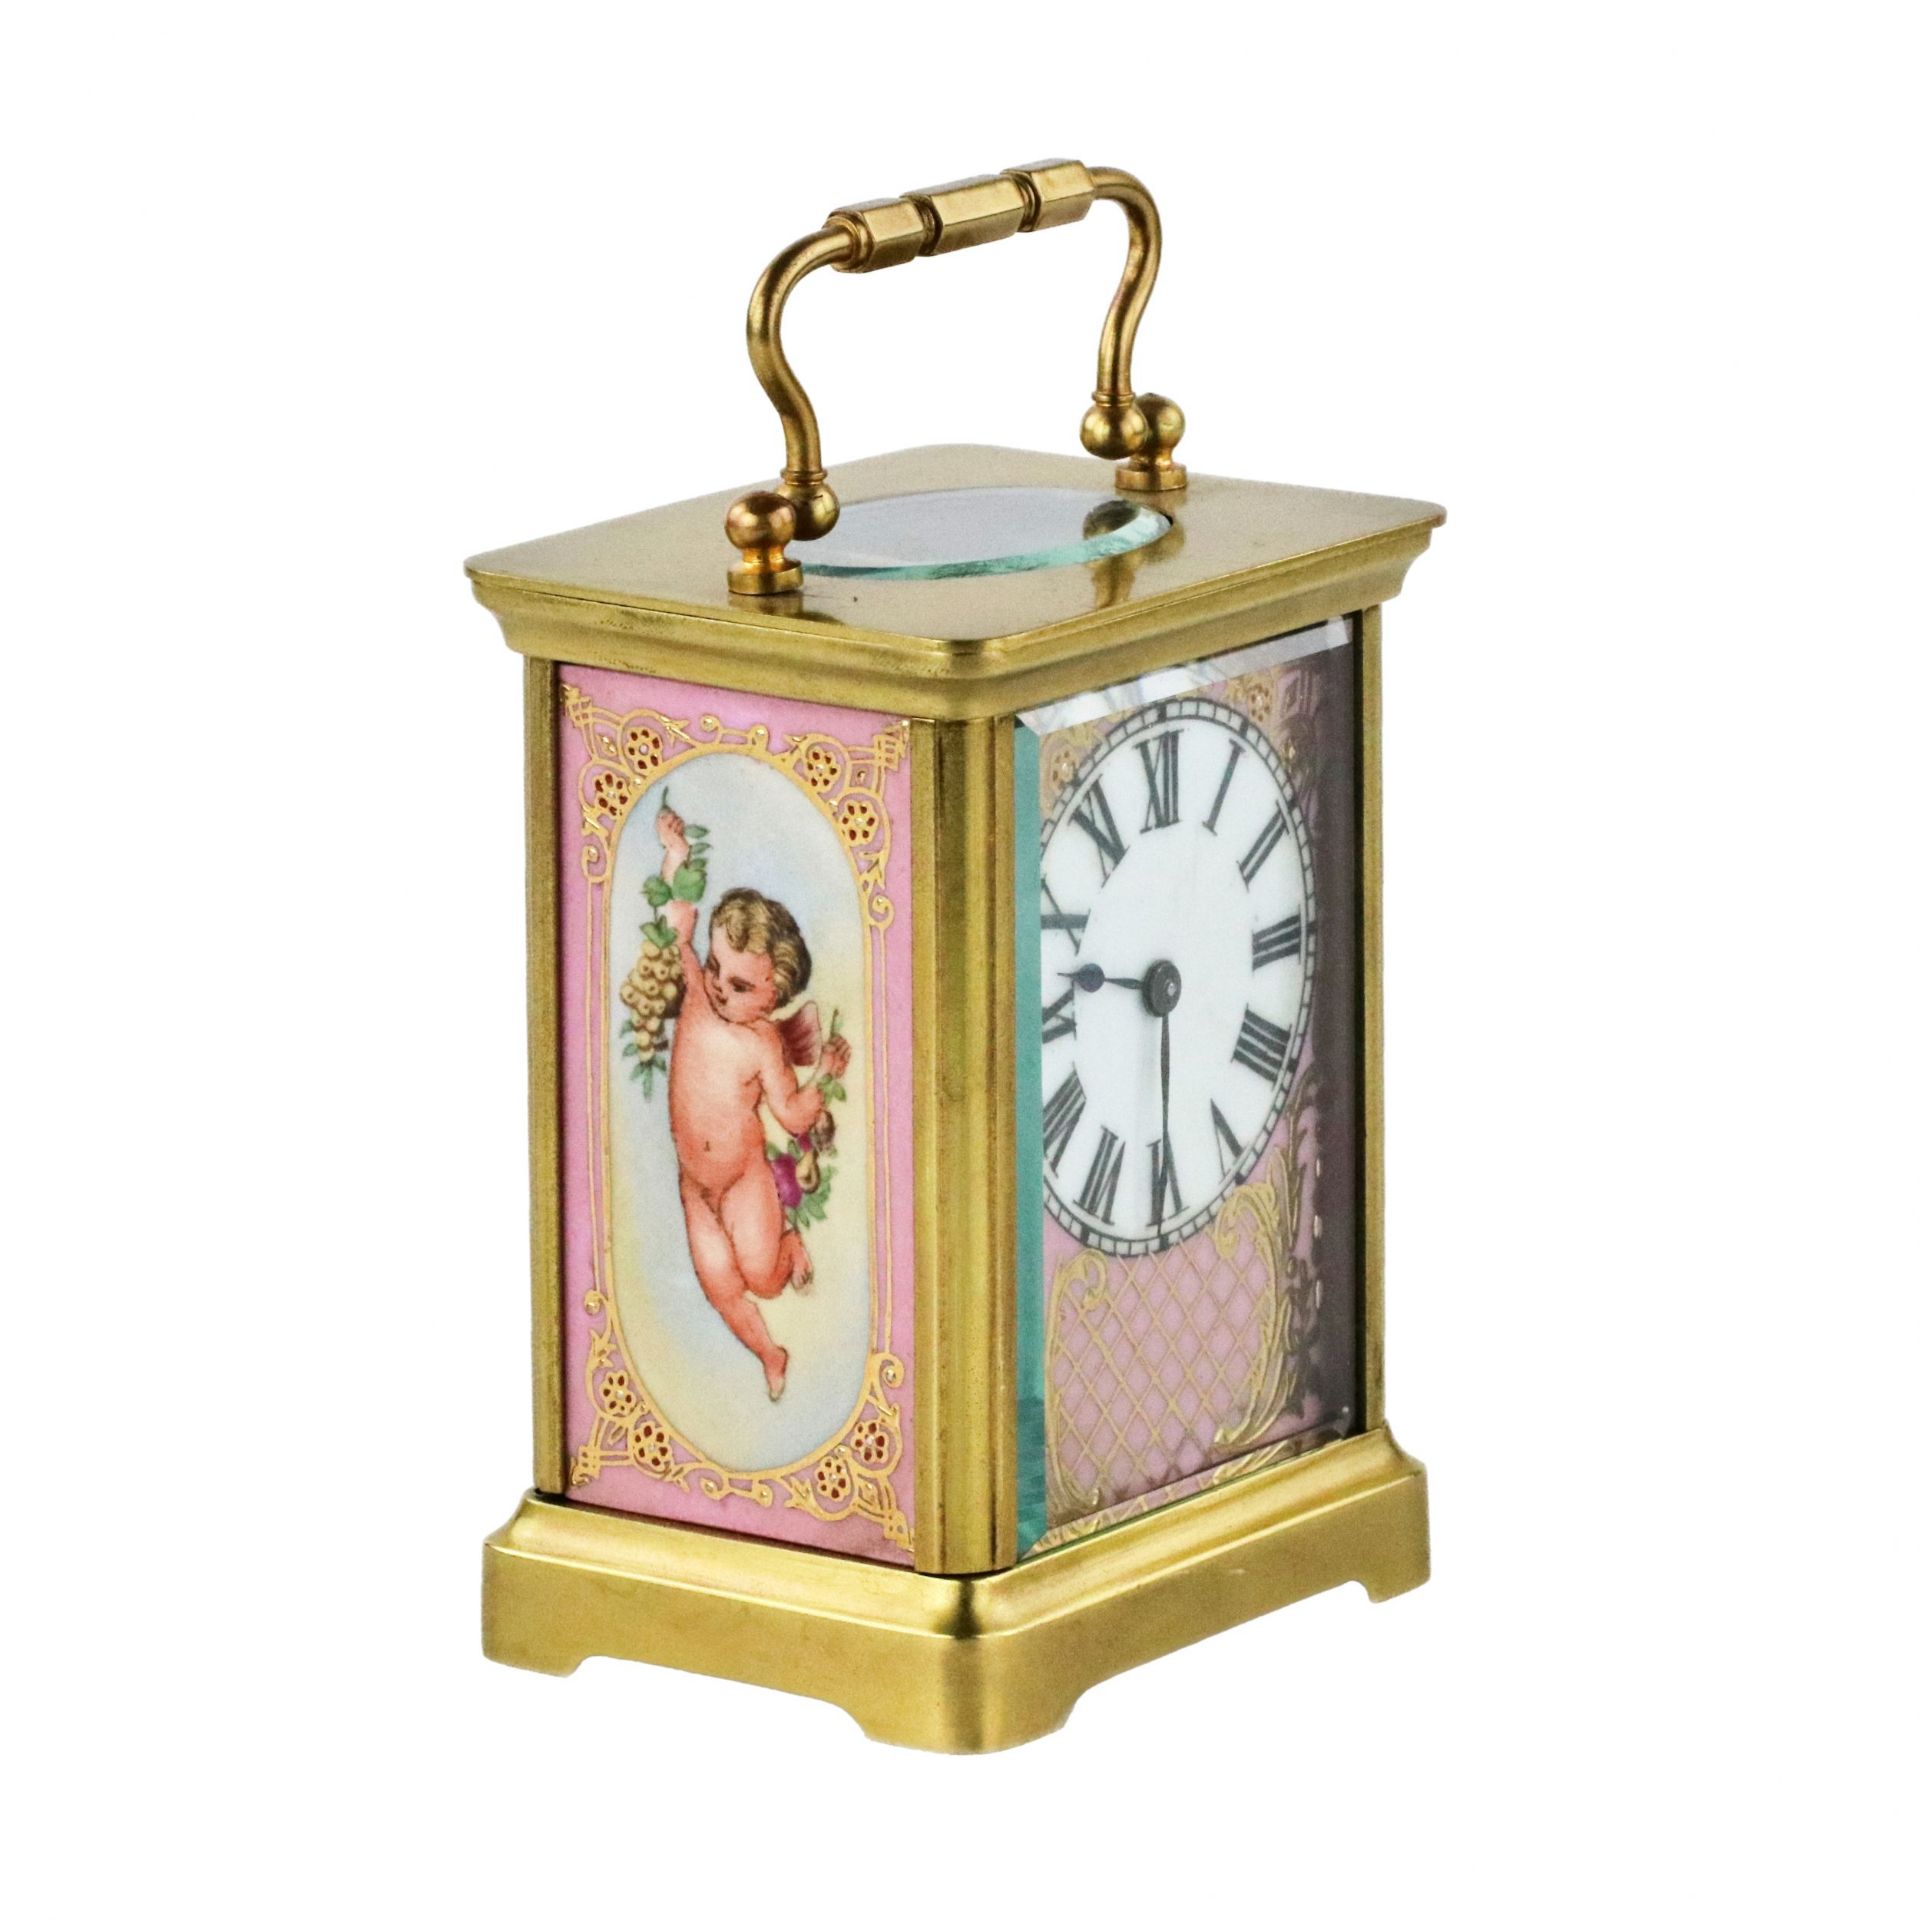 French carriage clock with porcelain painting, neo-rococo style. The turn of the 19th-20th centuries